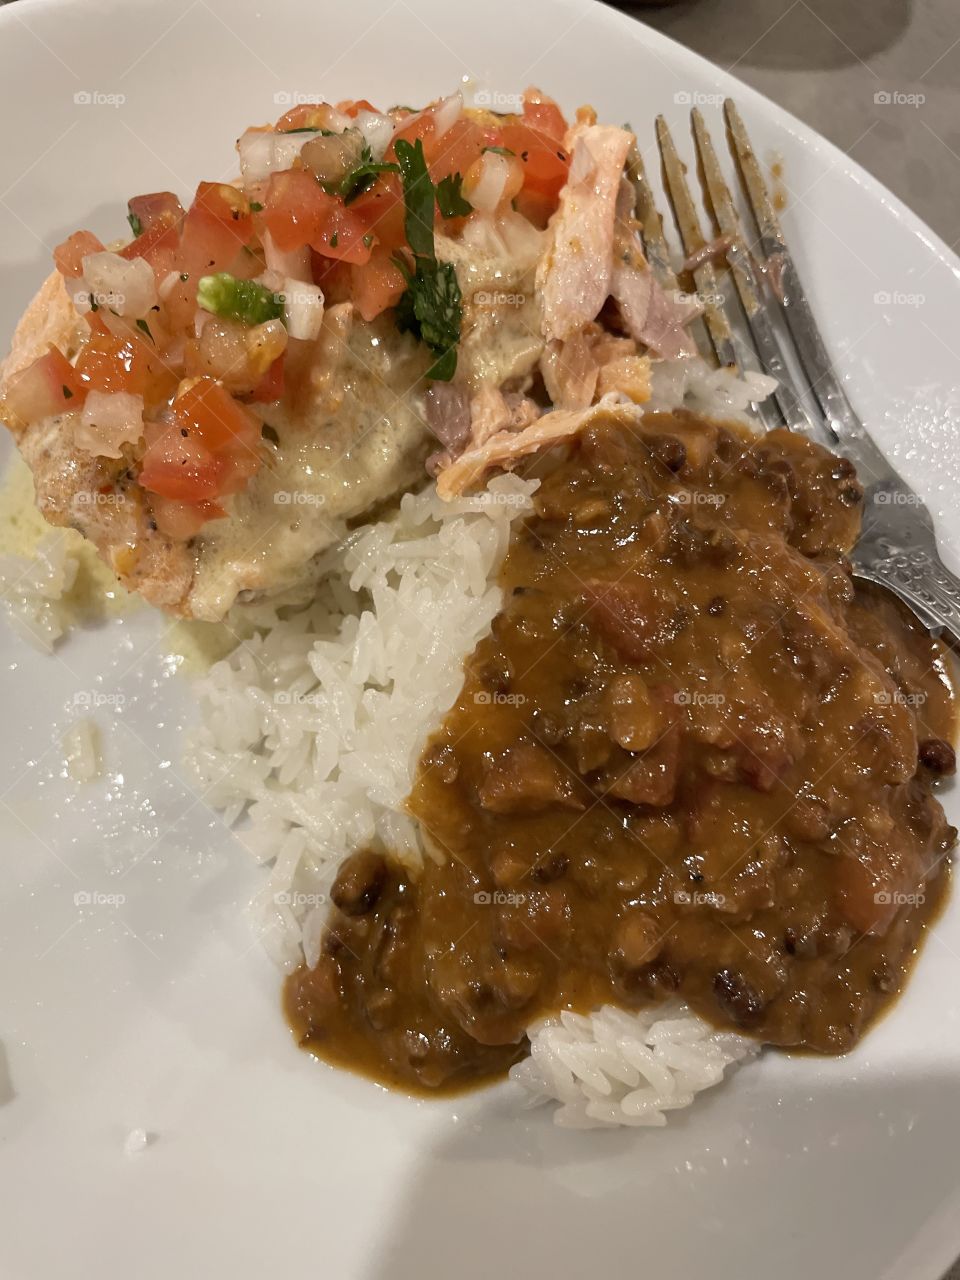 Pico topped Salmon in Cream-Sauce, Rice, and lentils